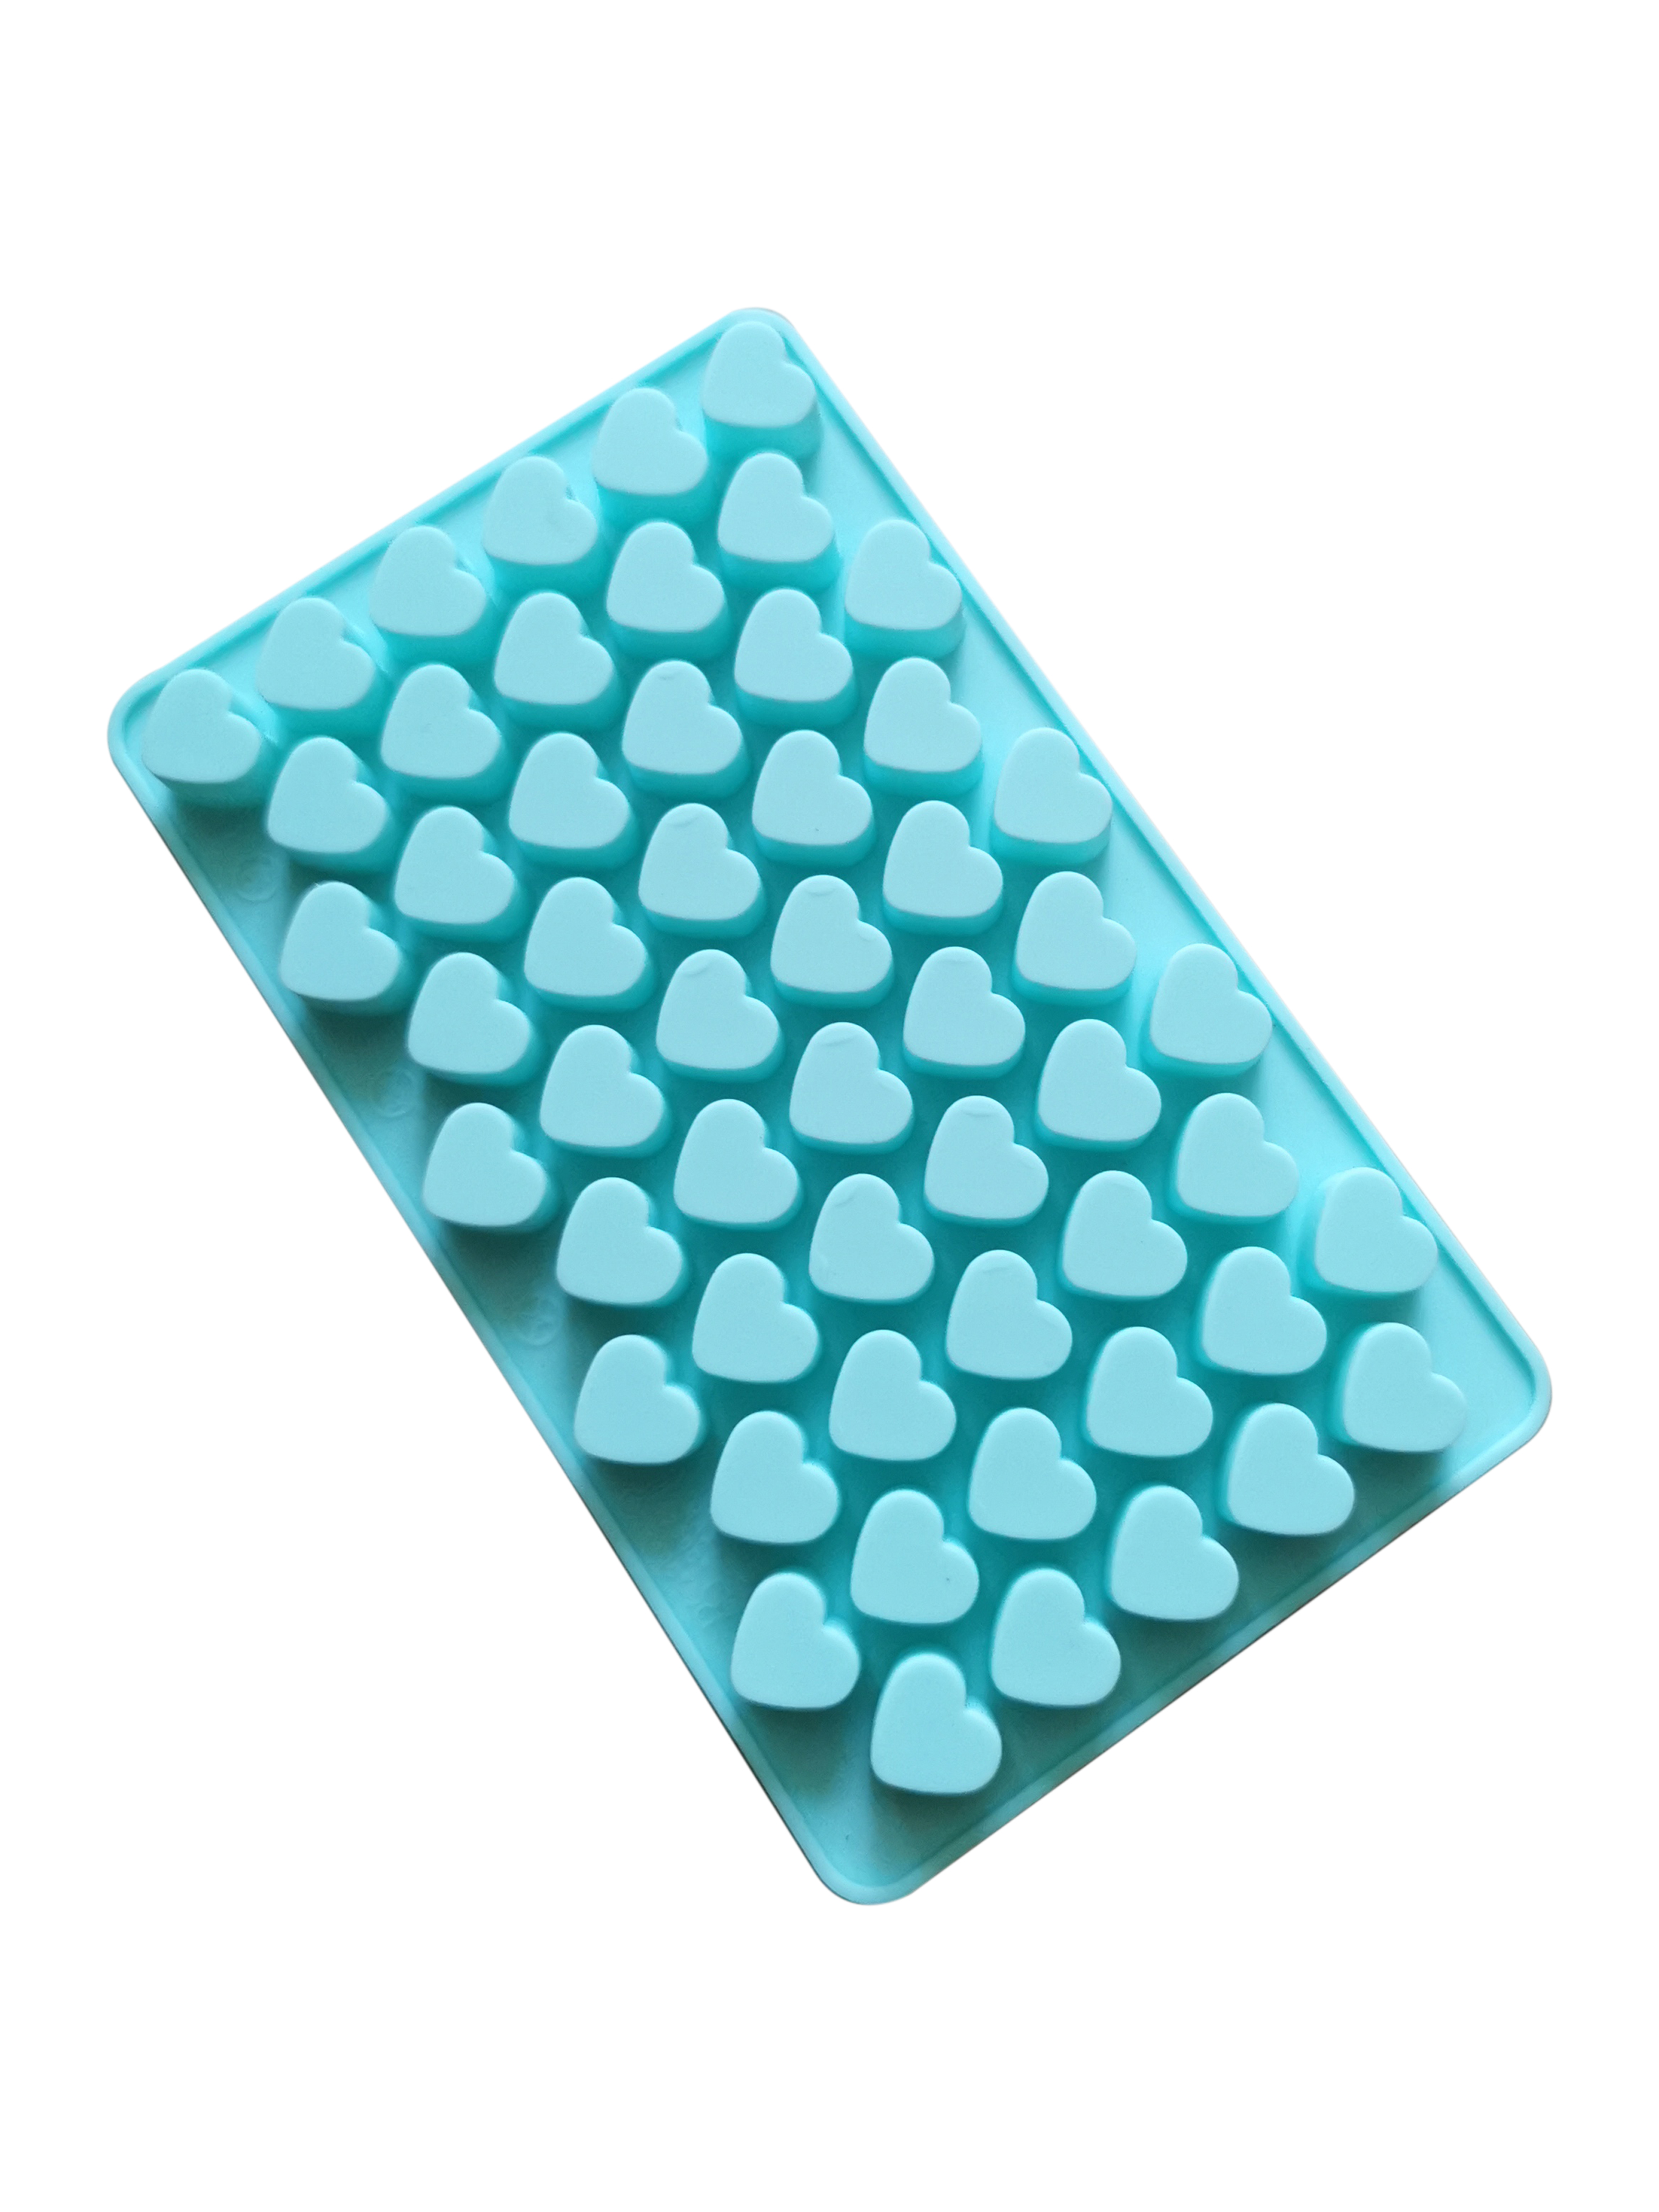 Small Heart Shape Silicone, Gummy Molds Silicone, Candy Molds, Mini Heart 55-Cavity Molds for Bakin, Non-stick Heart Silicone molds for Chocolate, Baking Supplies